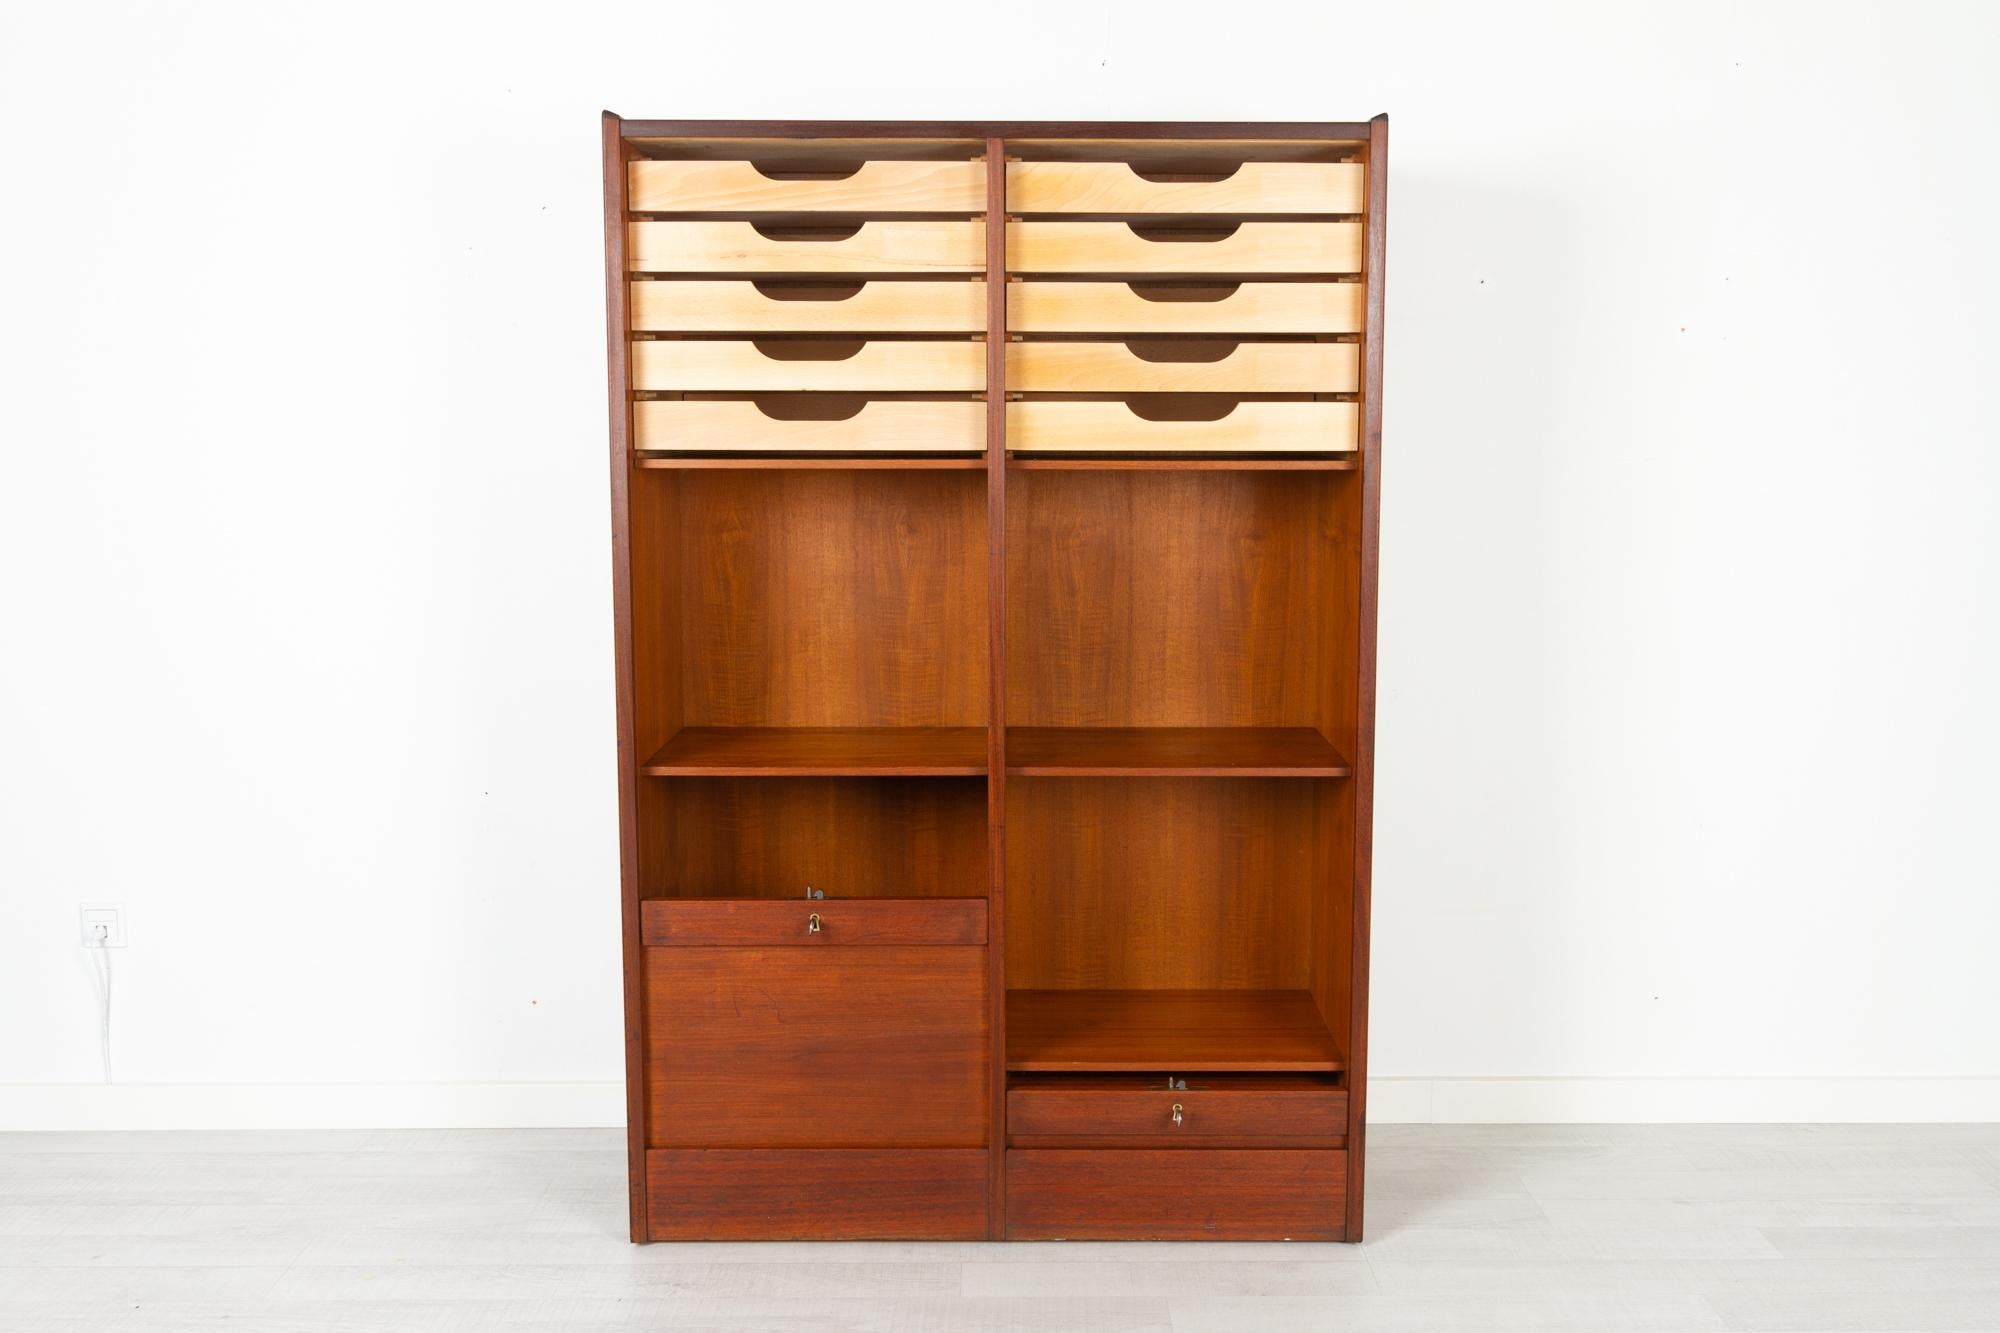 Vintage Danish teak cabinet with tambour doors 1960s
Large Danish modern cabinet with double vertical tambour doors with slats in solid teak. Two compartments, each with two fixed shelves and five drawers. Drawers in solid beech and dovetail